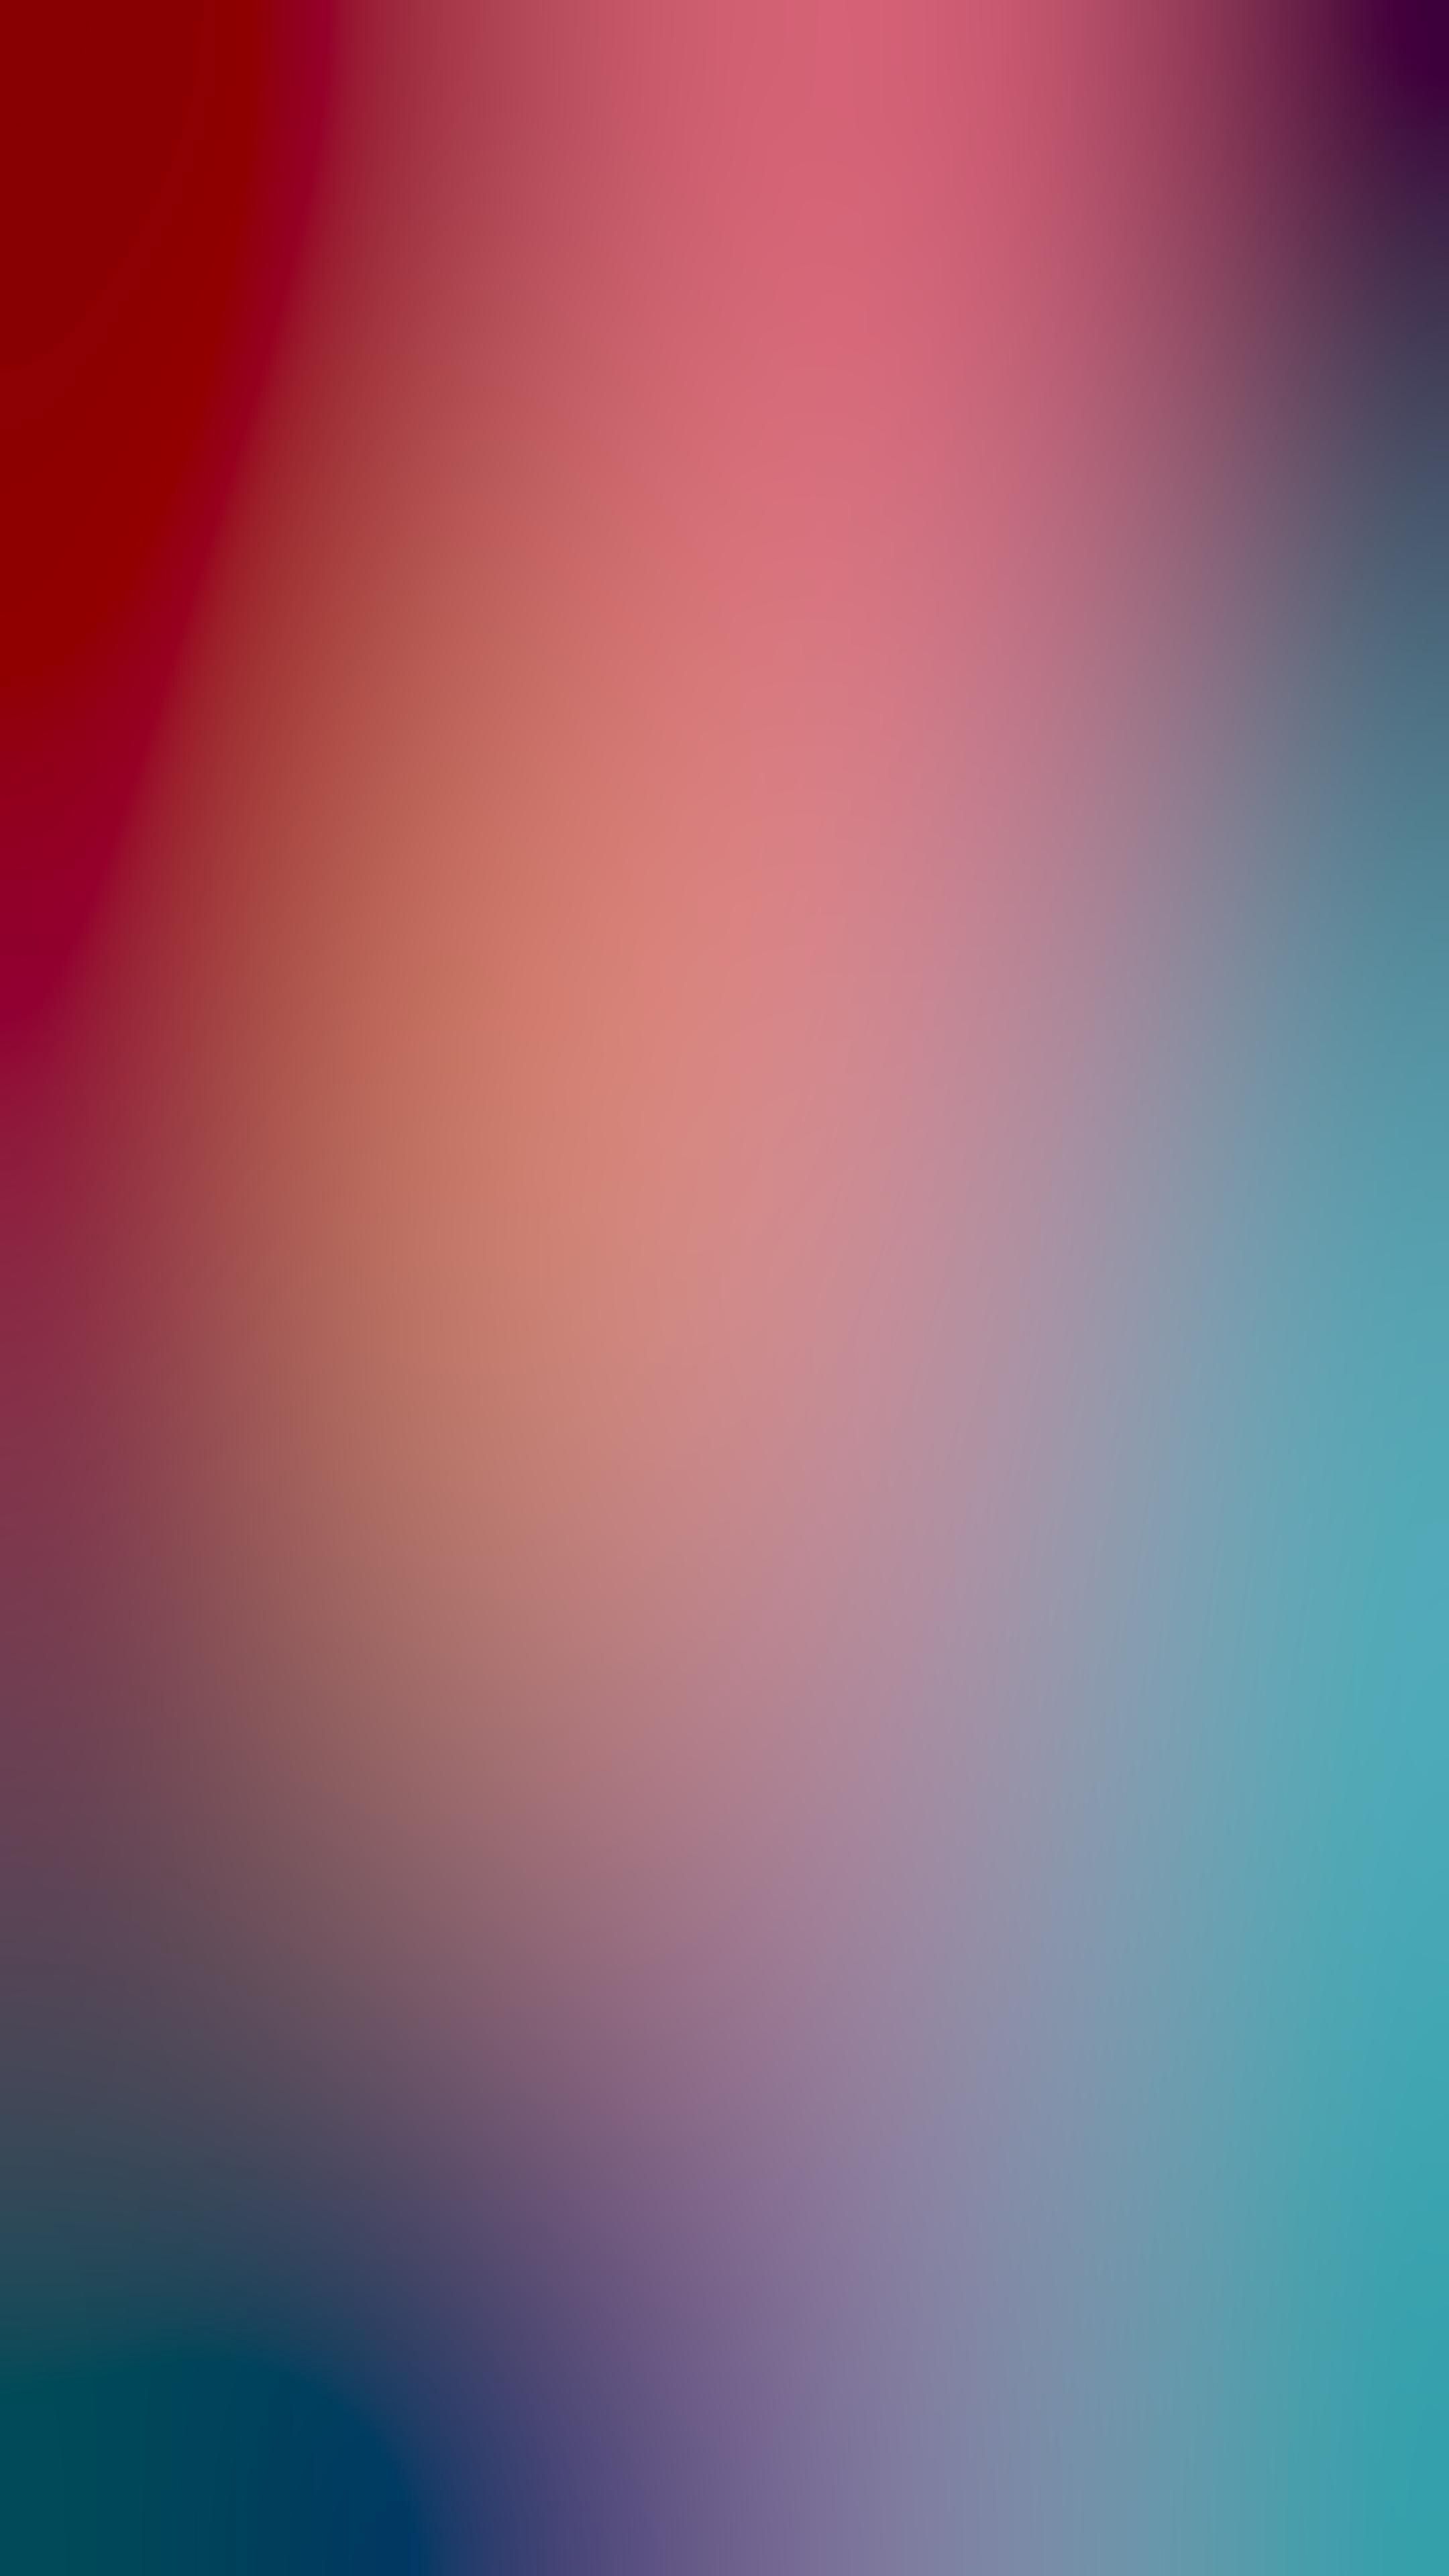 motley, multicolored, gradient, smooth, abstract, blur